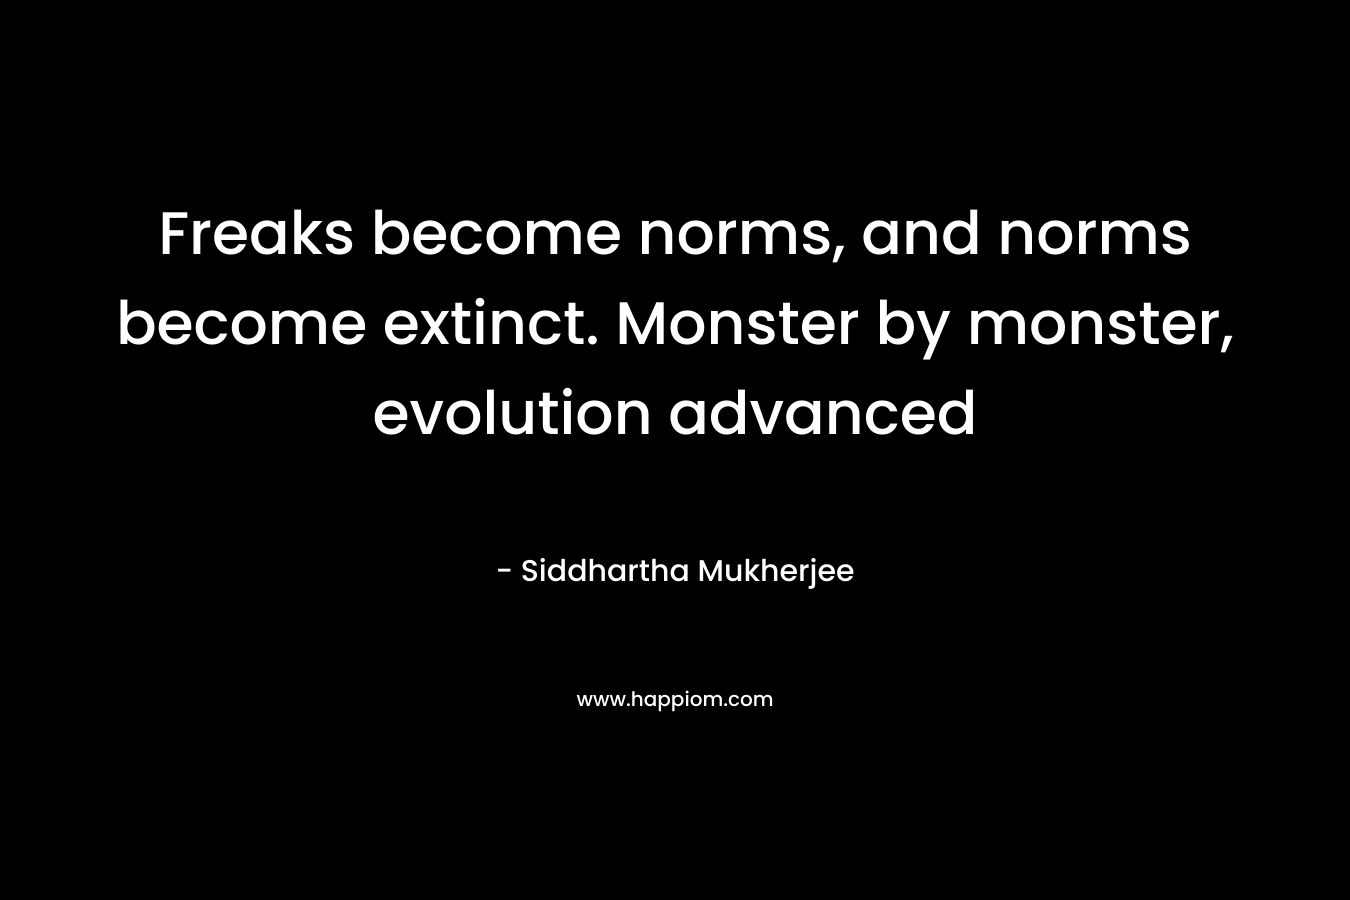 Freaks become norms, and norms become extinct. Monster by monster, evolution advanced – Siddhartha Mukherjee